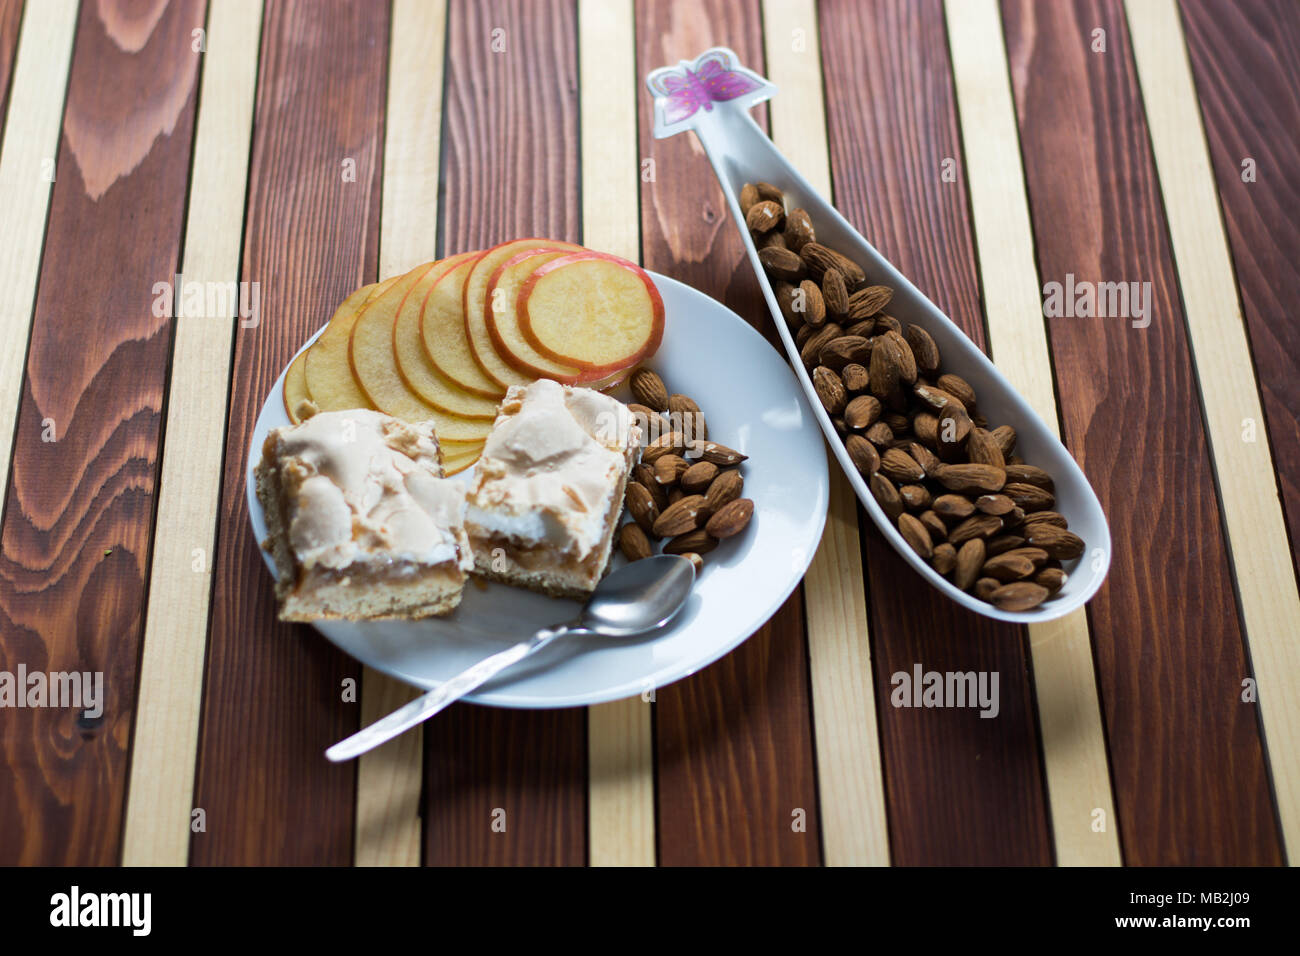 Square shape sliced omemade apple pie with kumquats and almonds on wooden background Stock Photo